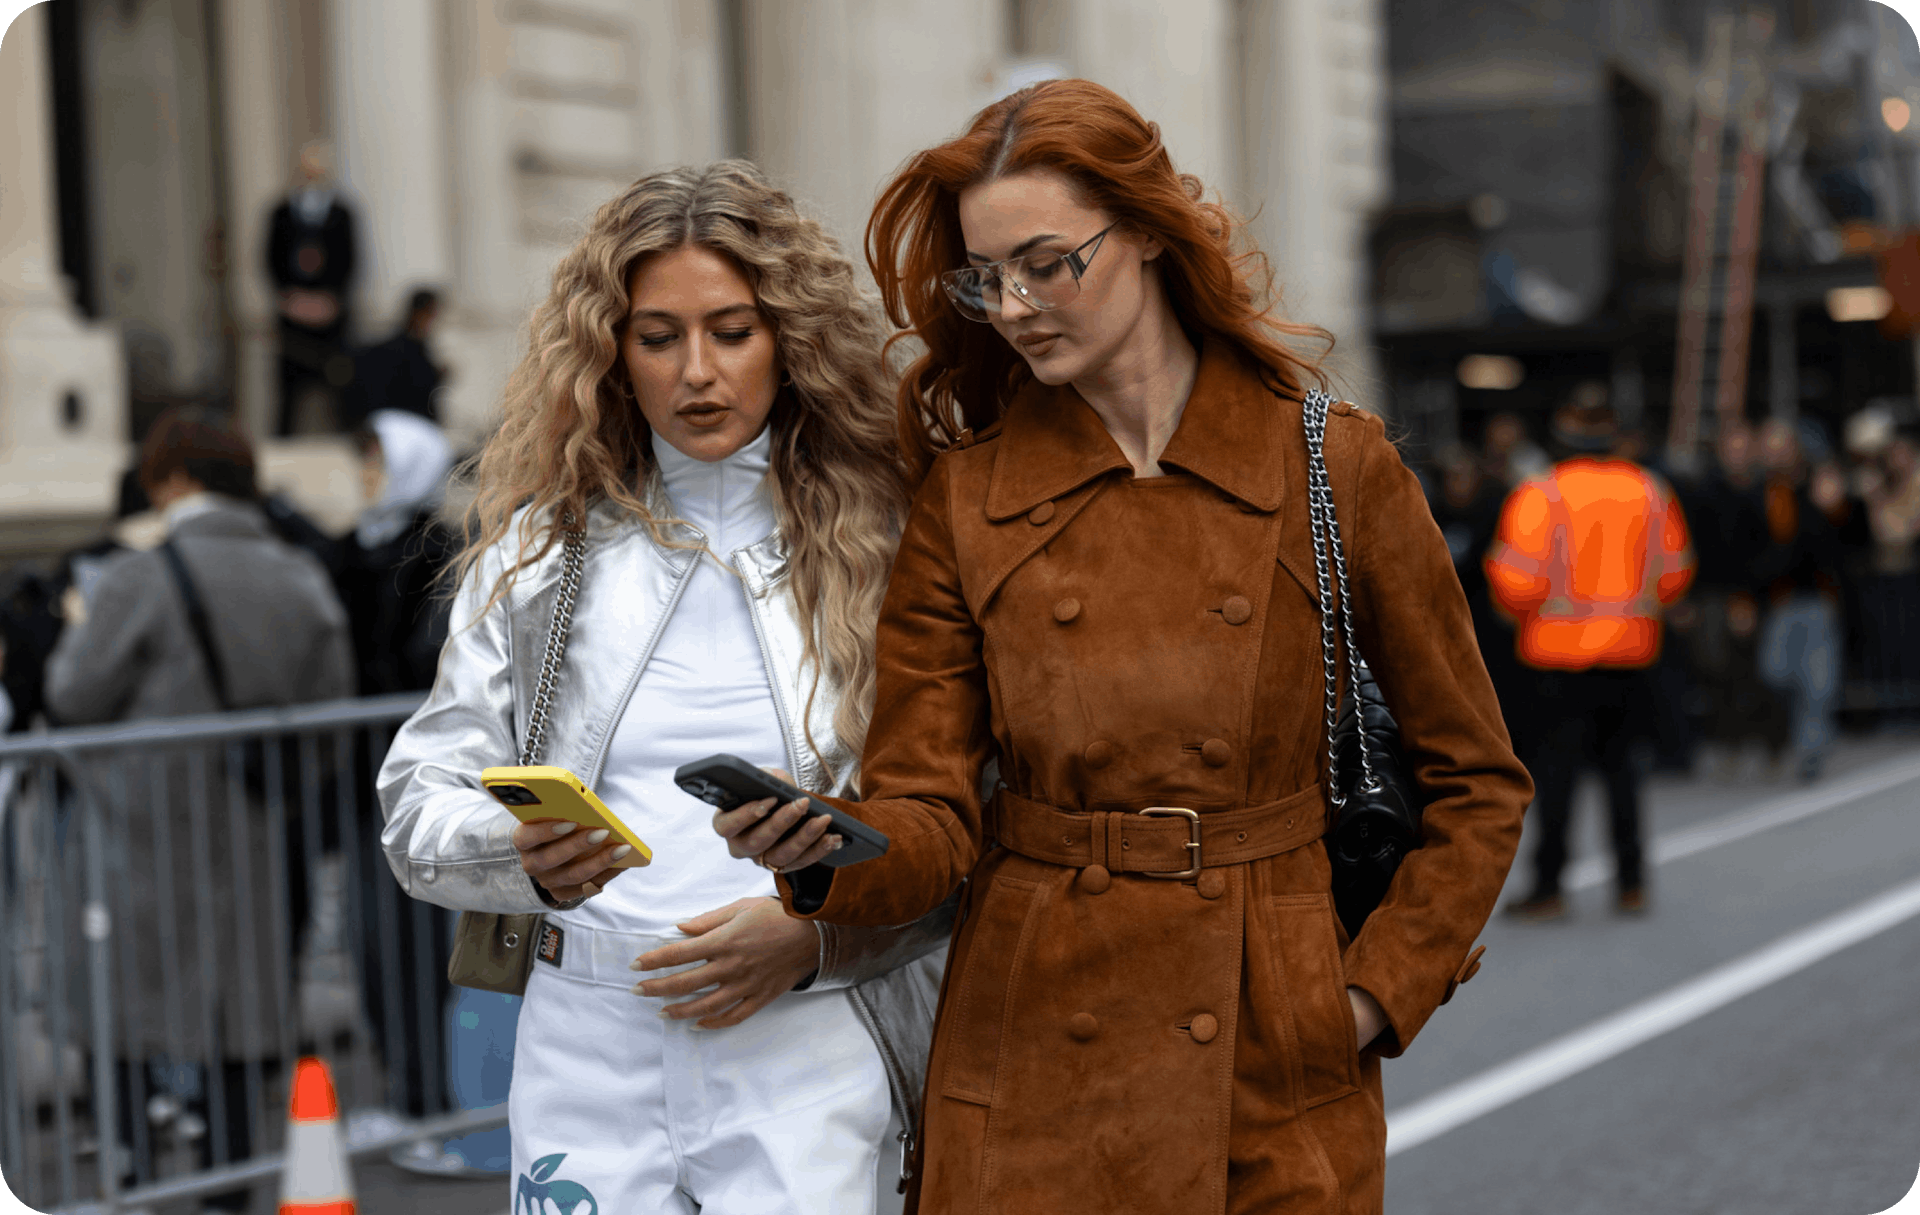 Street Style photograph in which two girls with long hair and winter clothes walk around smiling and looking at their mobile phone screens. 